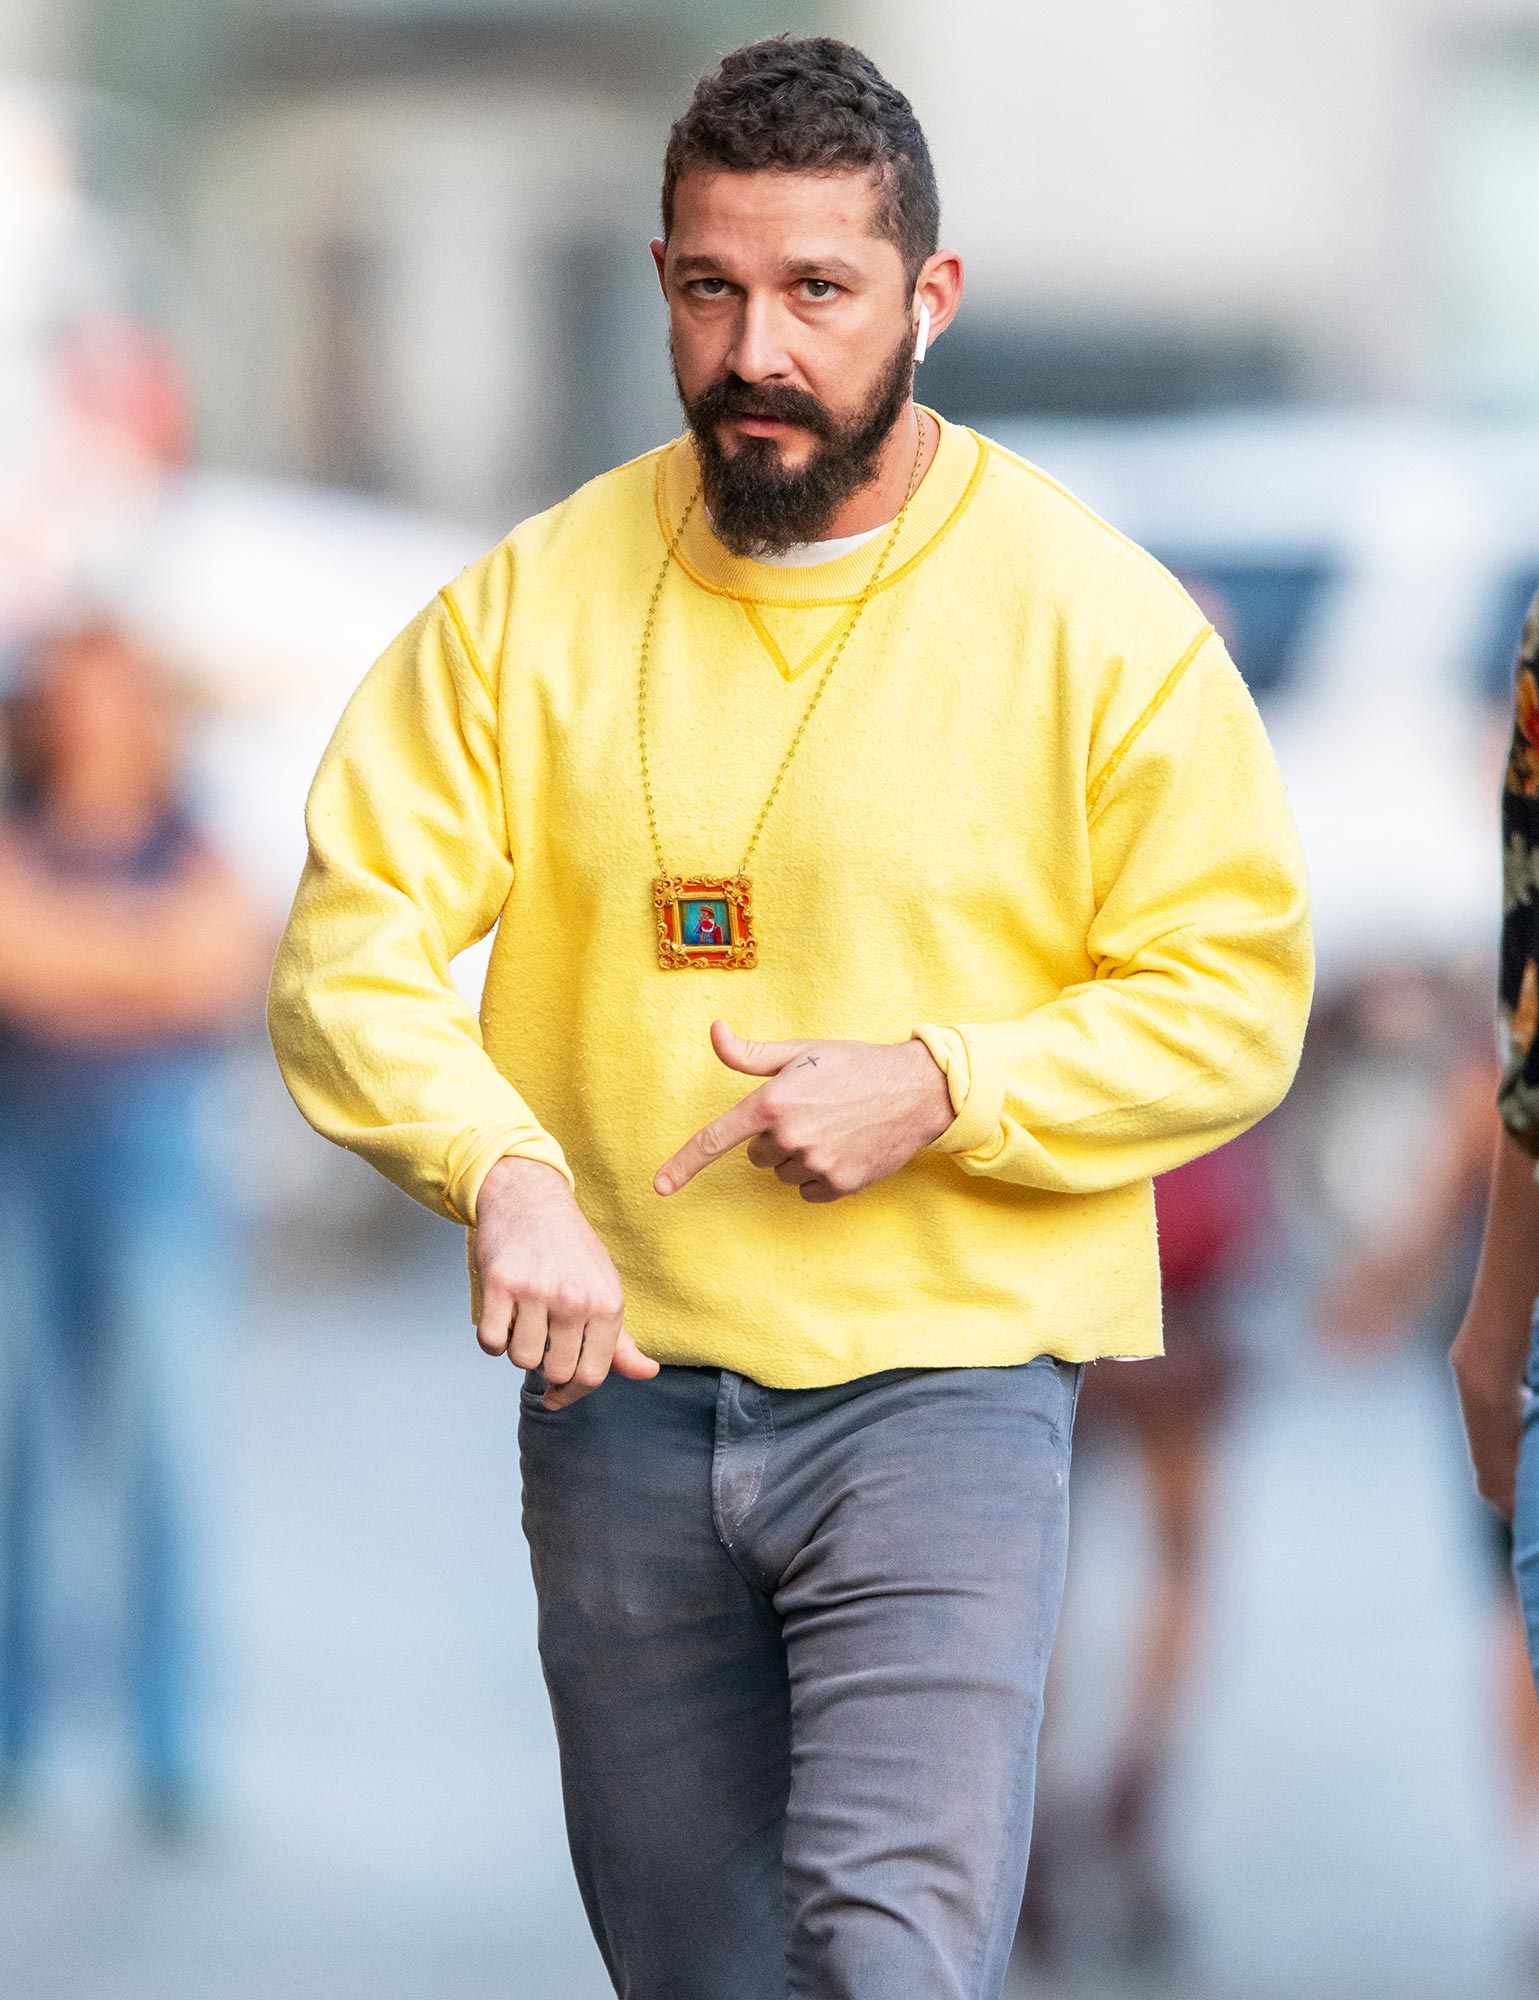 Shia LaBeouf Reportedly Considering Becoming a Deacon After Confirmation